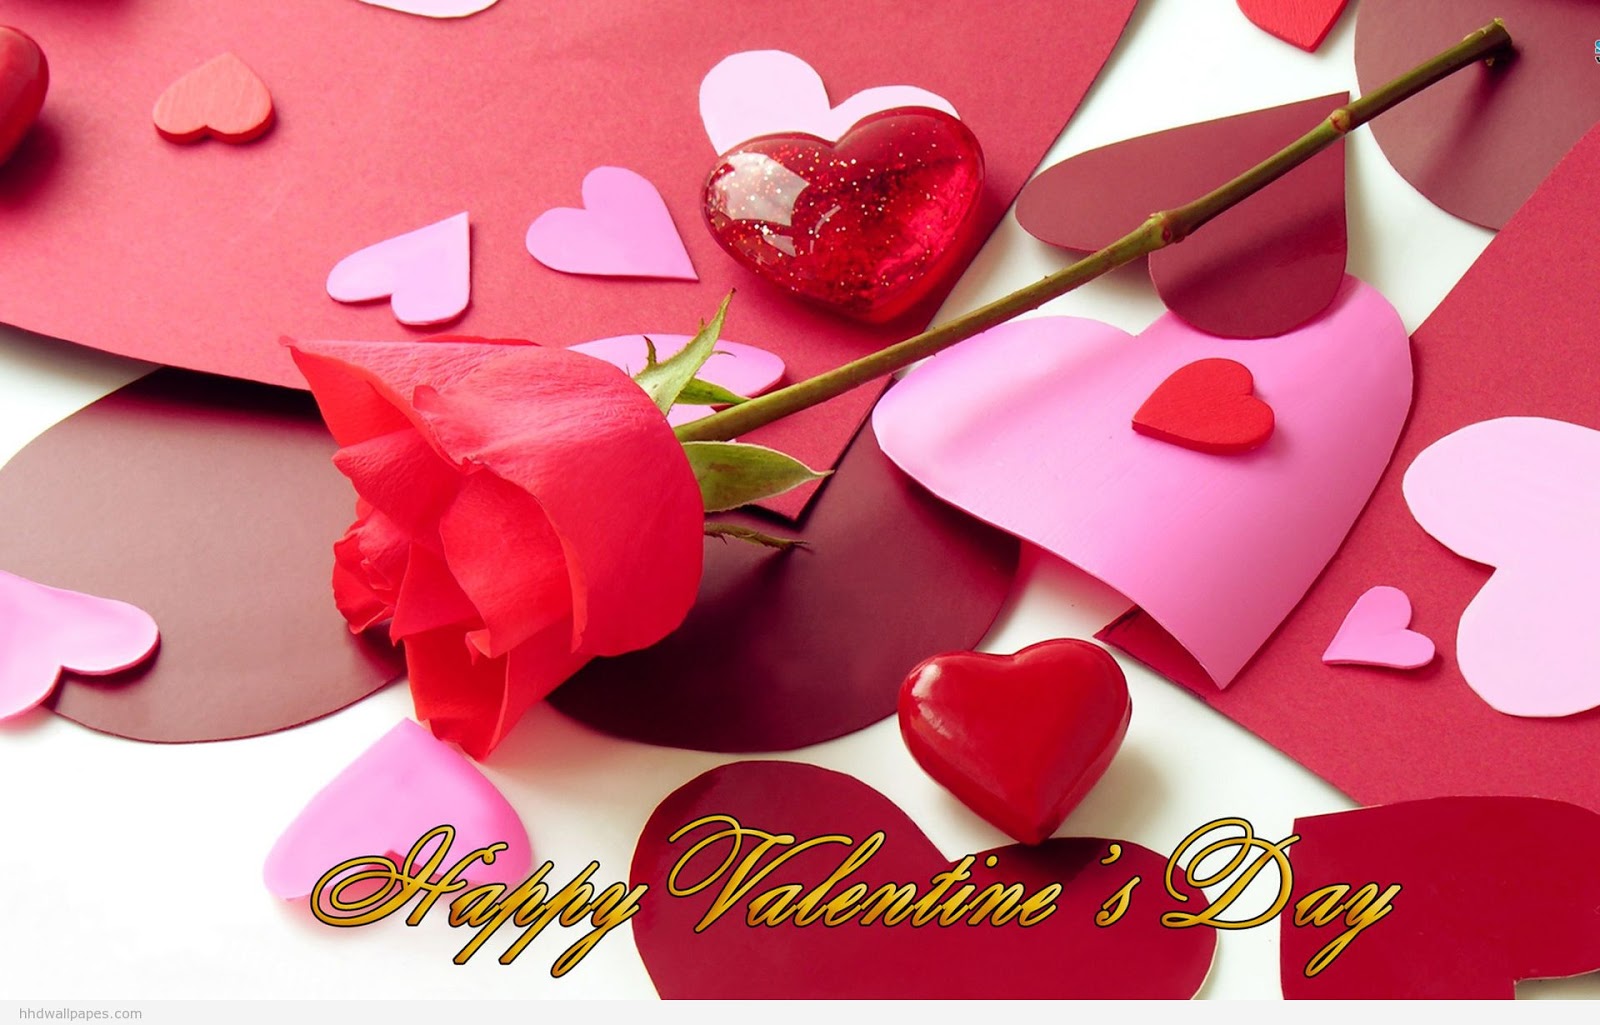 Download Best Happy Valentine Day My Sweetheart Wallpapers - The ...